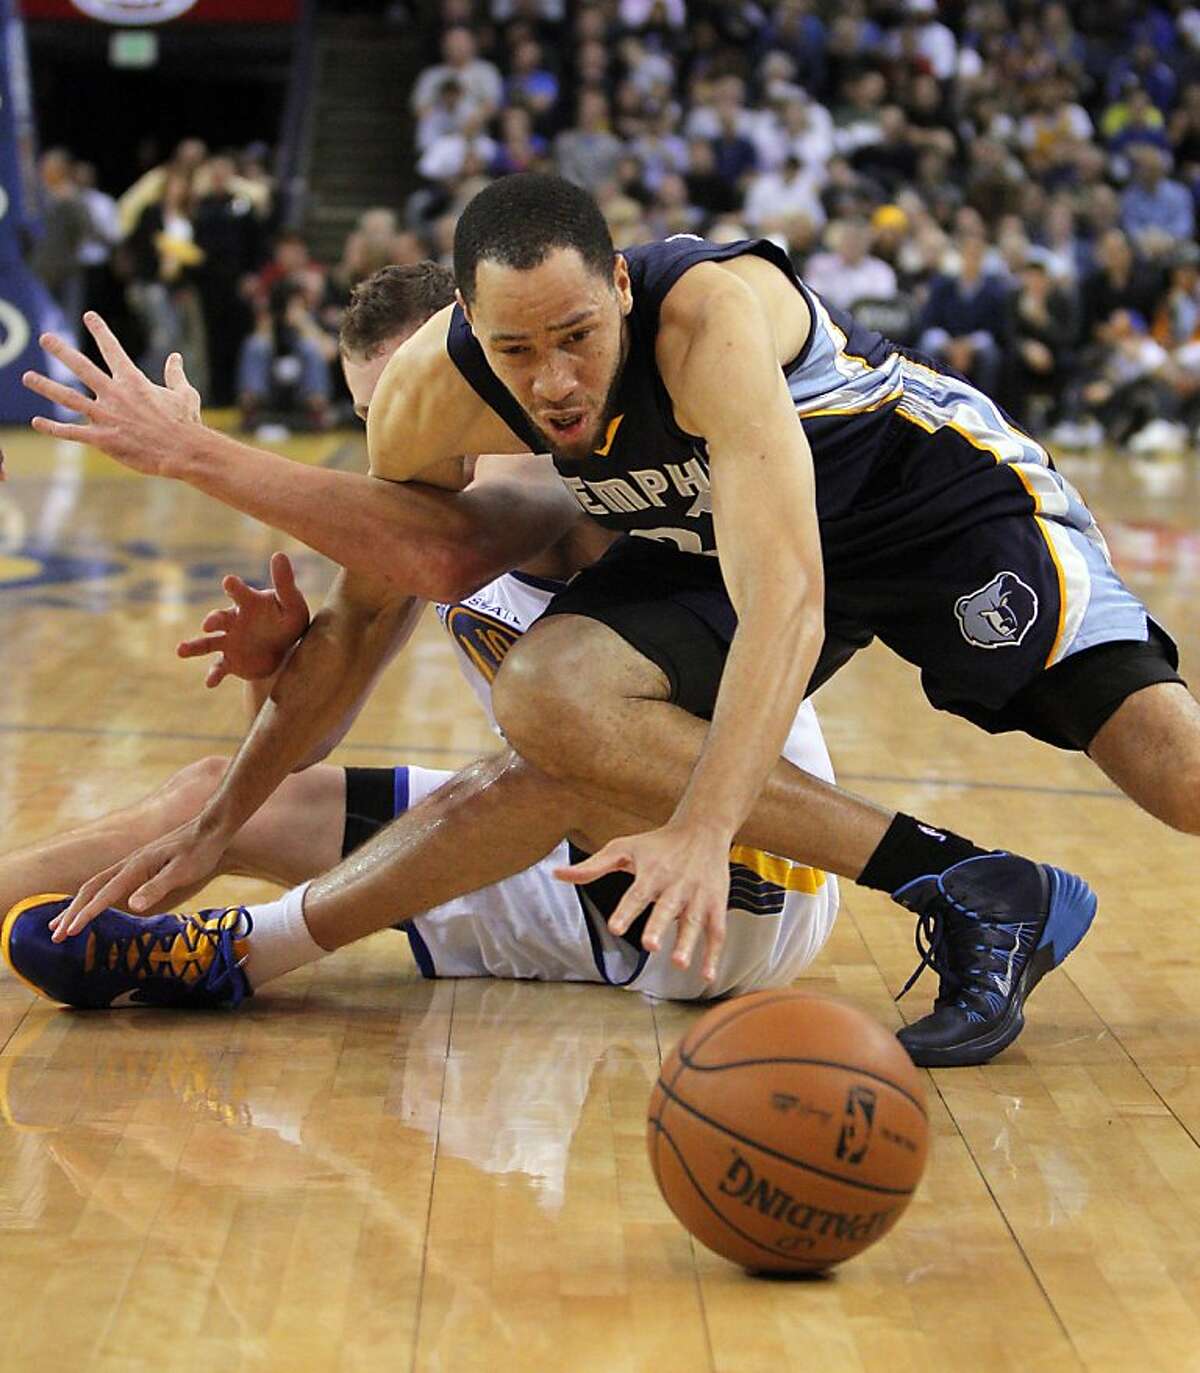 David Lee and Tayshaun Prince tussle for a loose ball in the first half. The Golden State Warriors played the Memphis Grizzlies at Oracle Arena in Oakland, Calif., on Wednesday, November 20, 2013